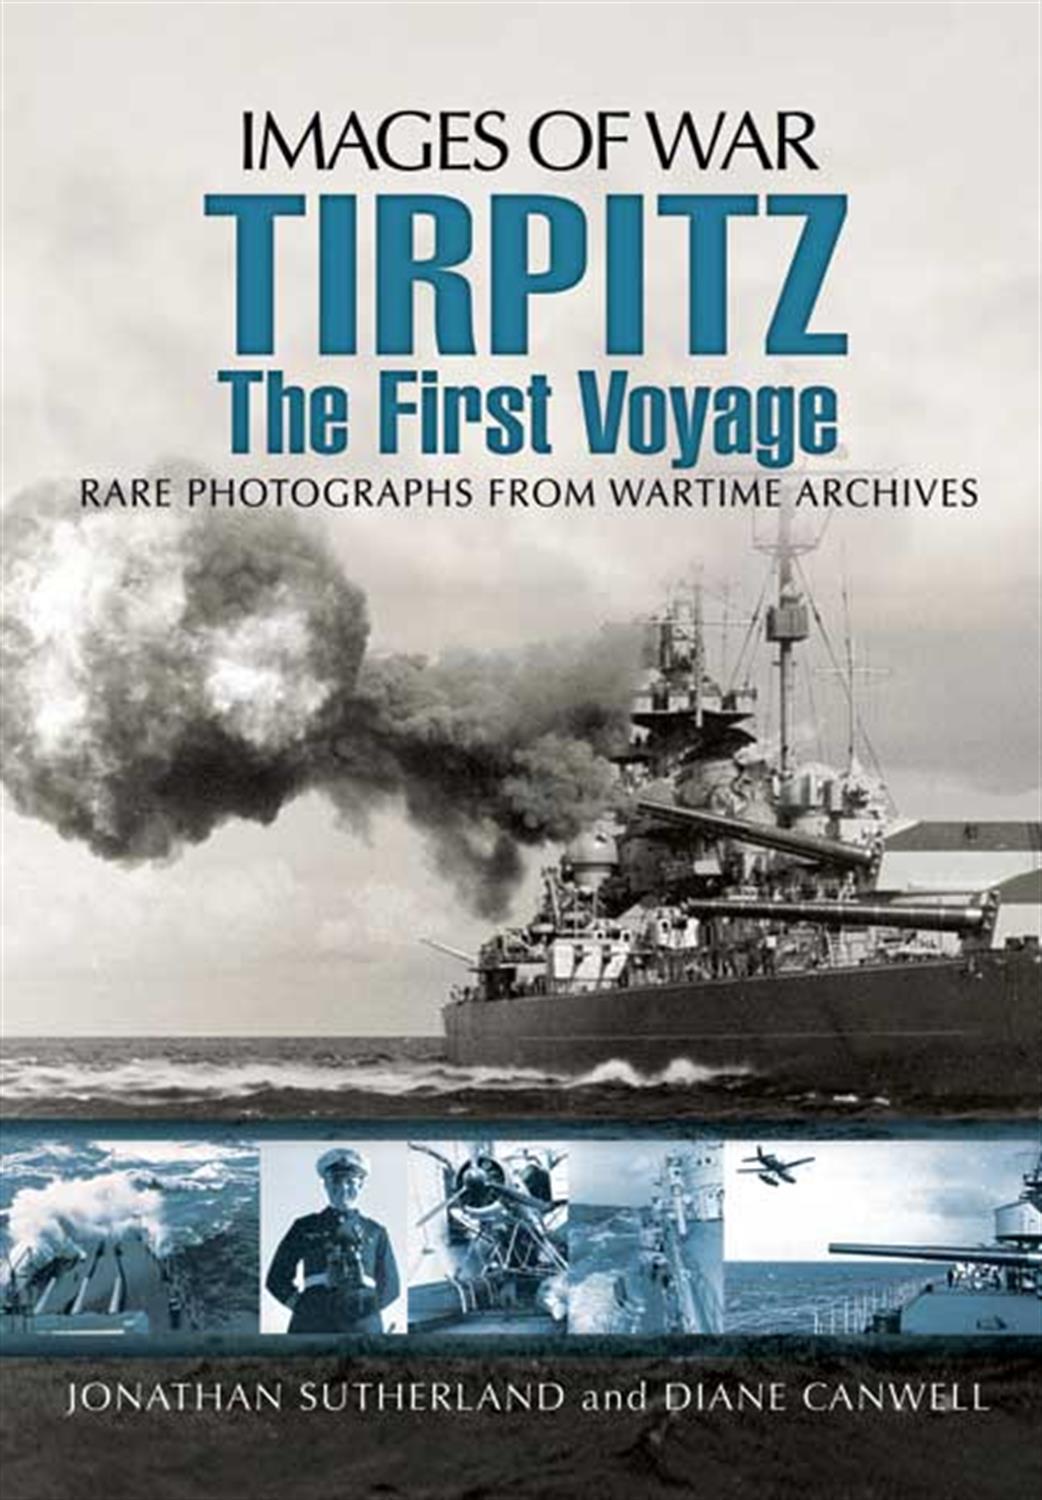 Pen & Sword 9781848846685 Image of War Tirpitz The First Voyage by Jonathan Sutherland & Diane Canwell